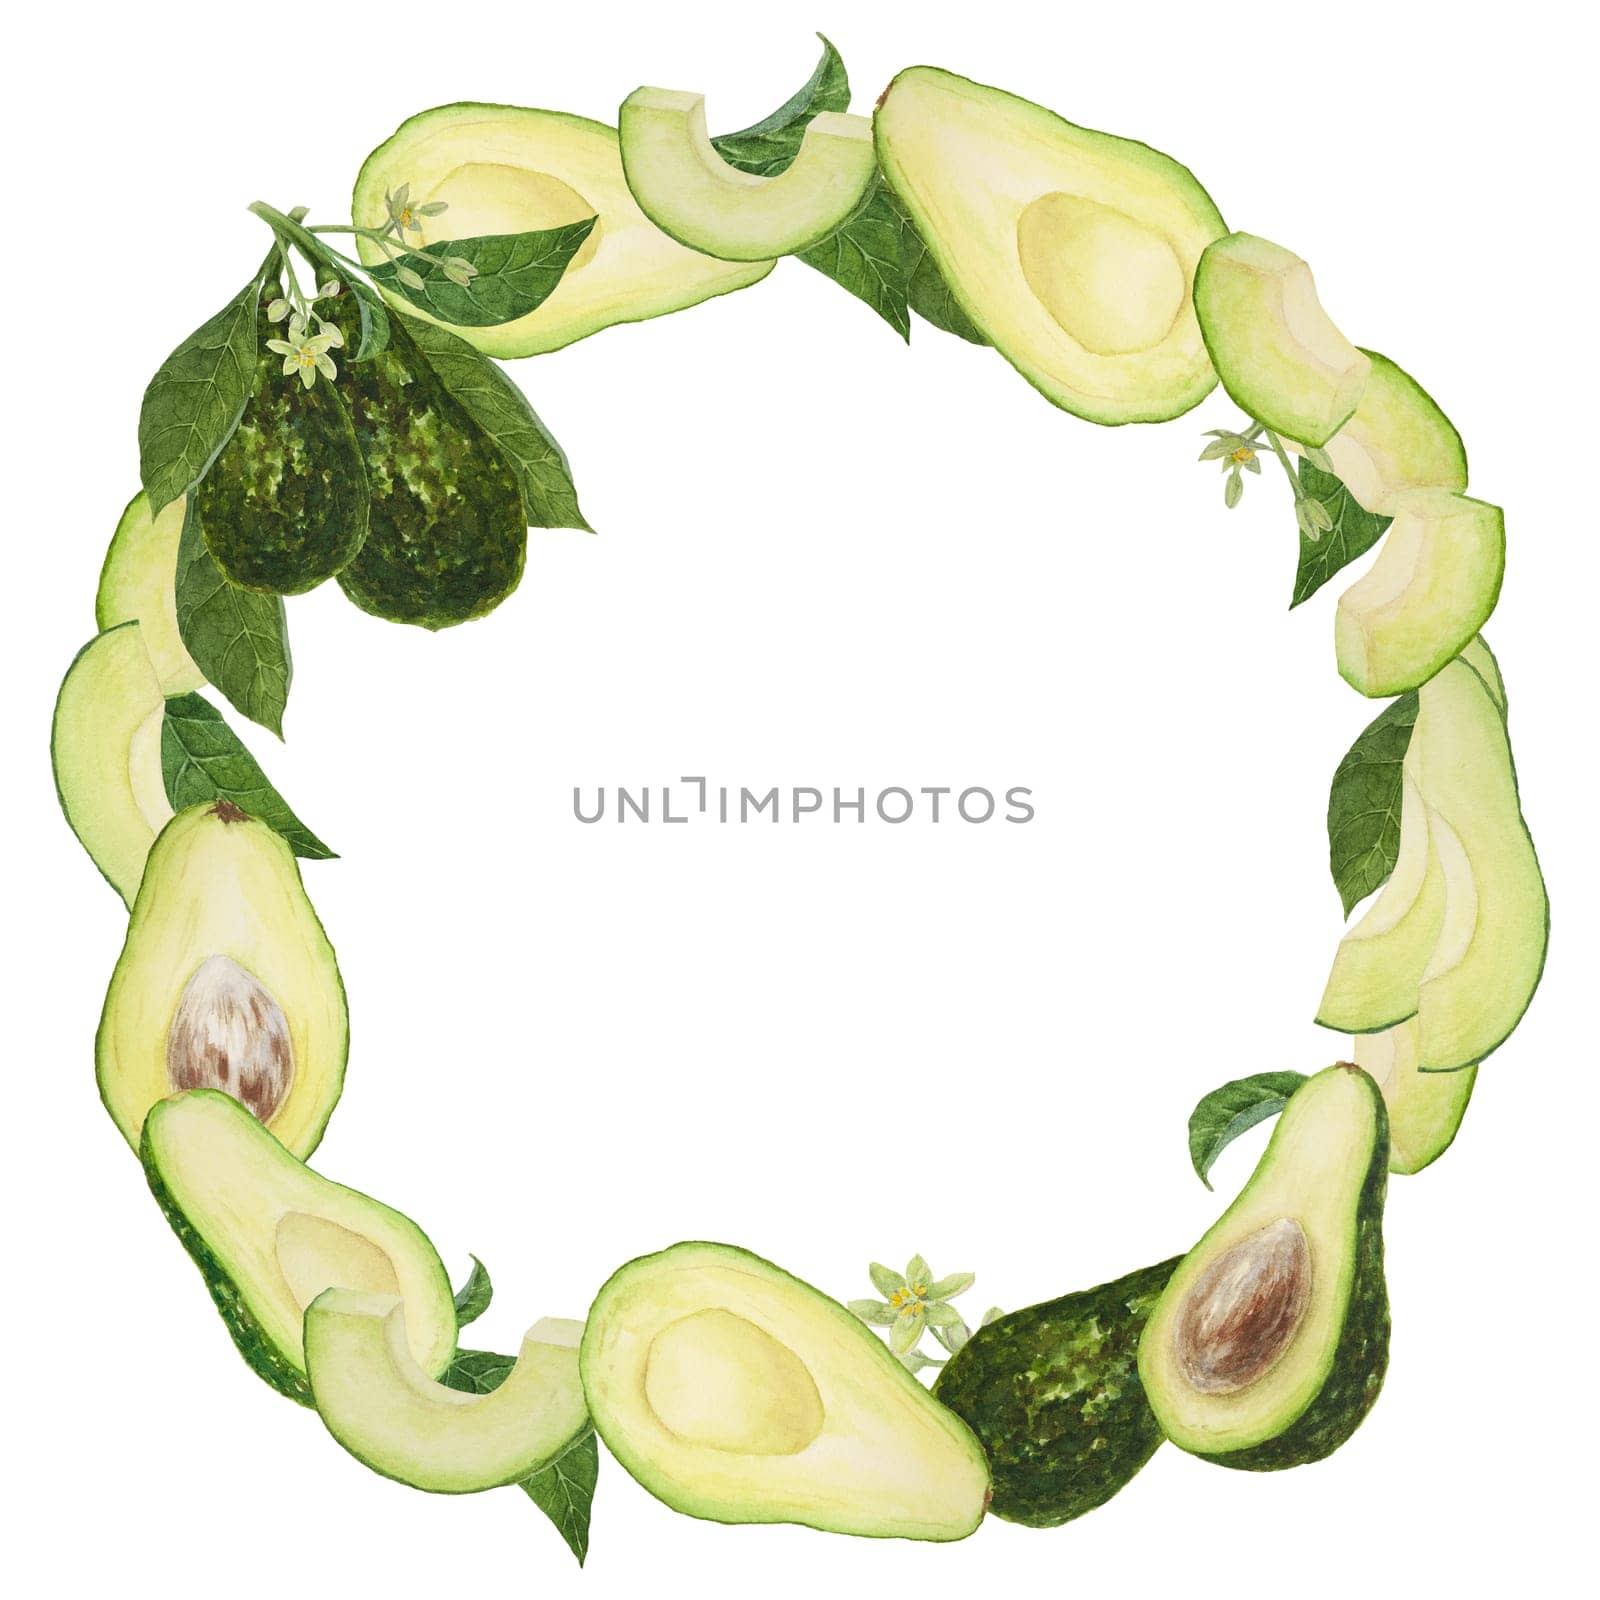 Frame, wreath of avocado with leaves and flowers watercolor hand drawn realistic illustration. Green and fresh art of salad, sauce, guacamole, smoothie ingredient. For textile, menu, cards, paper, package design